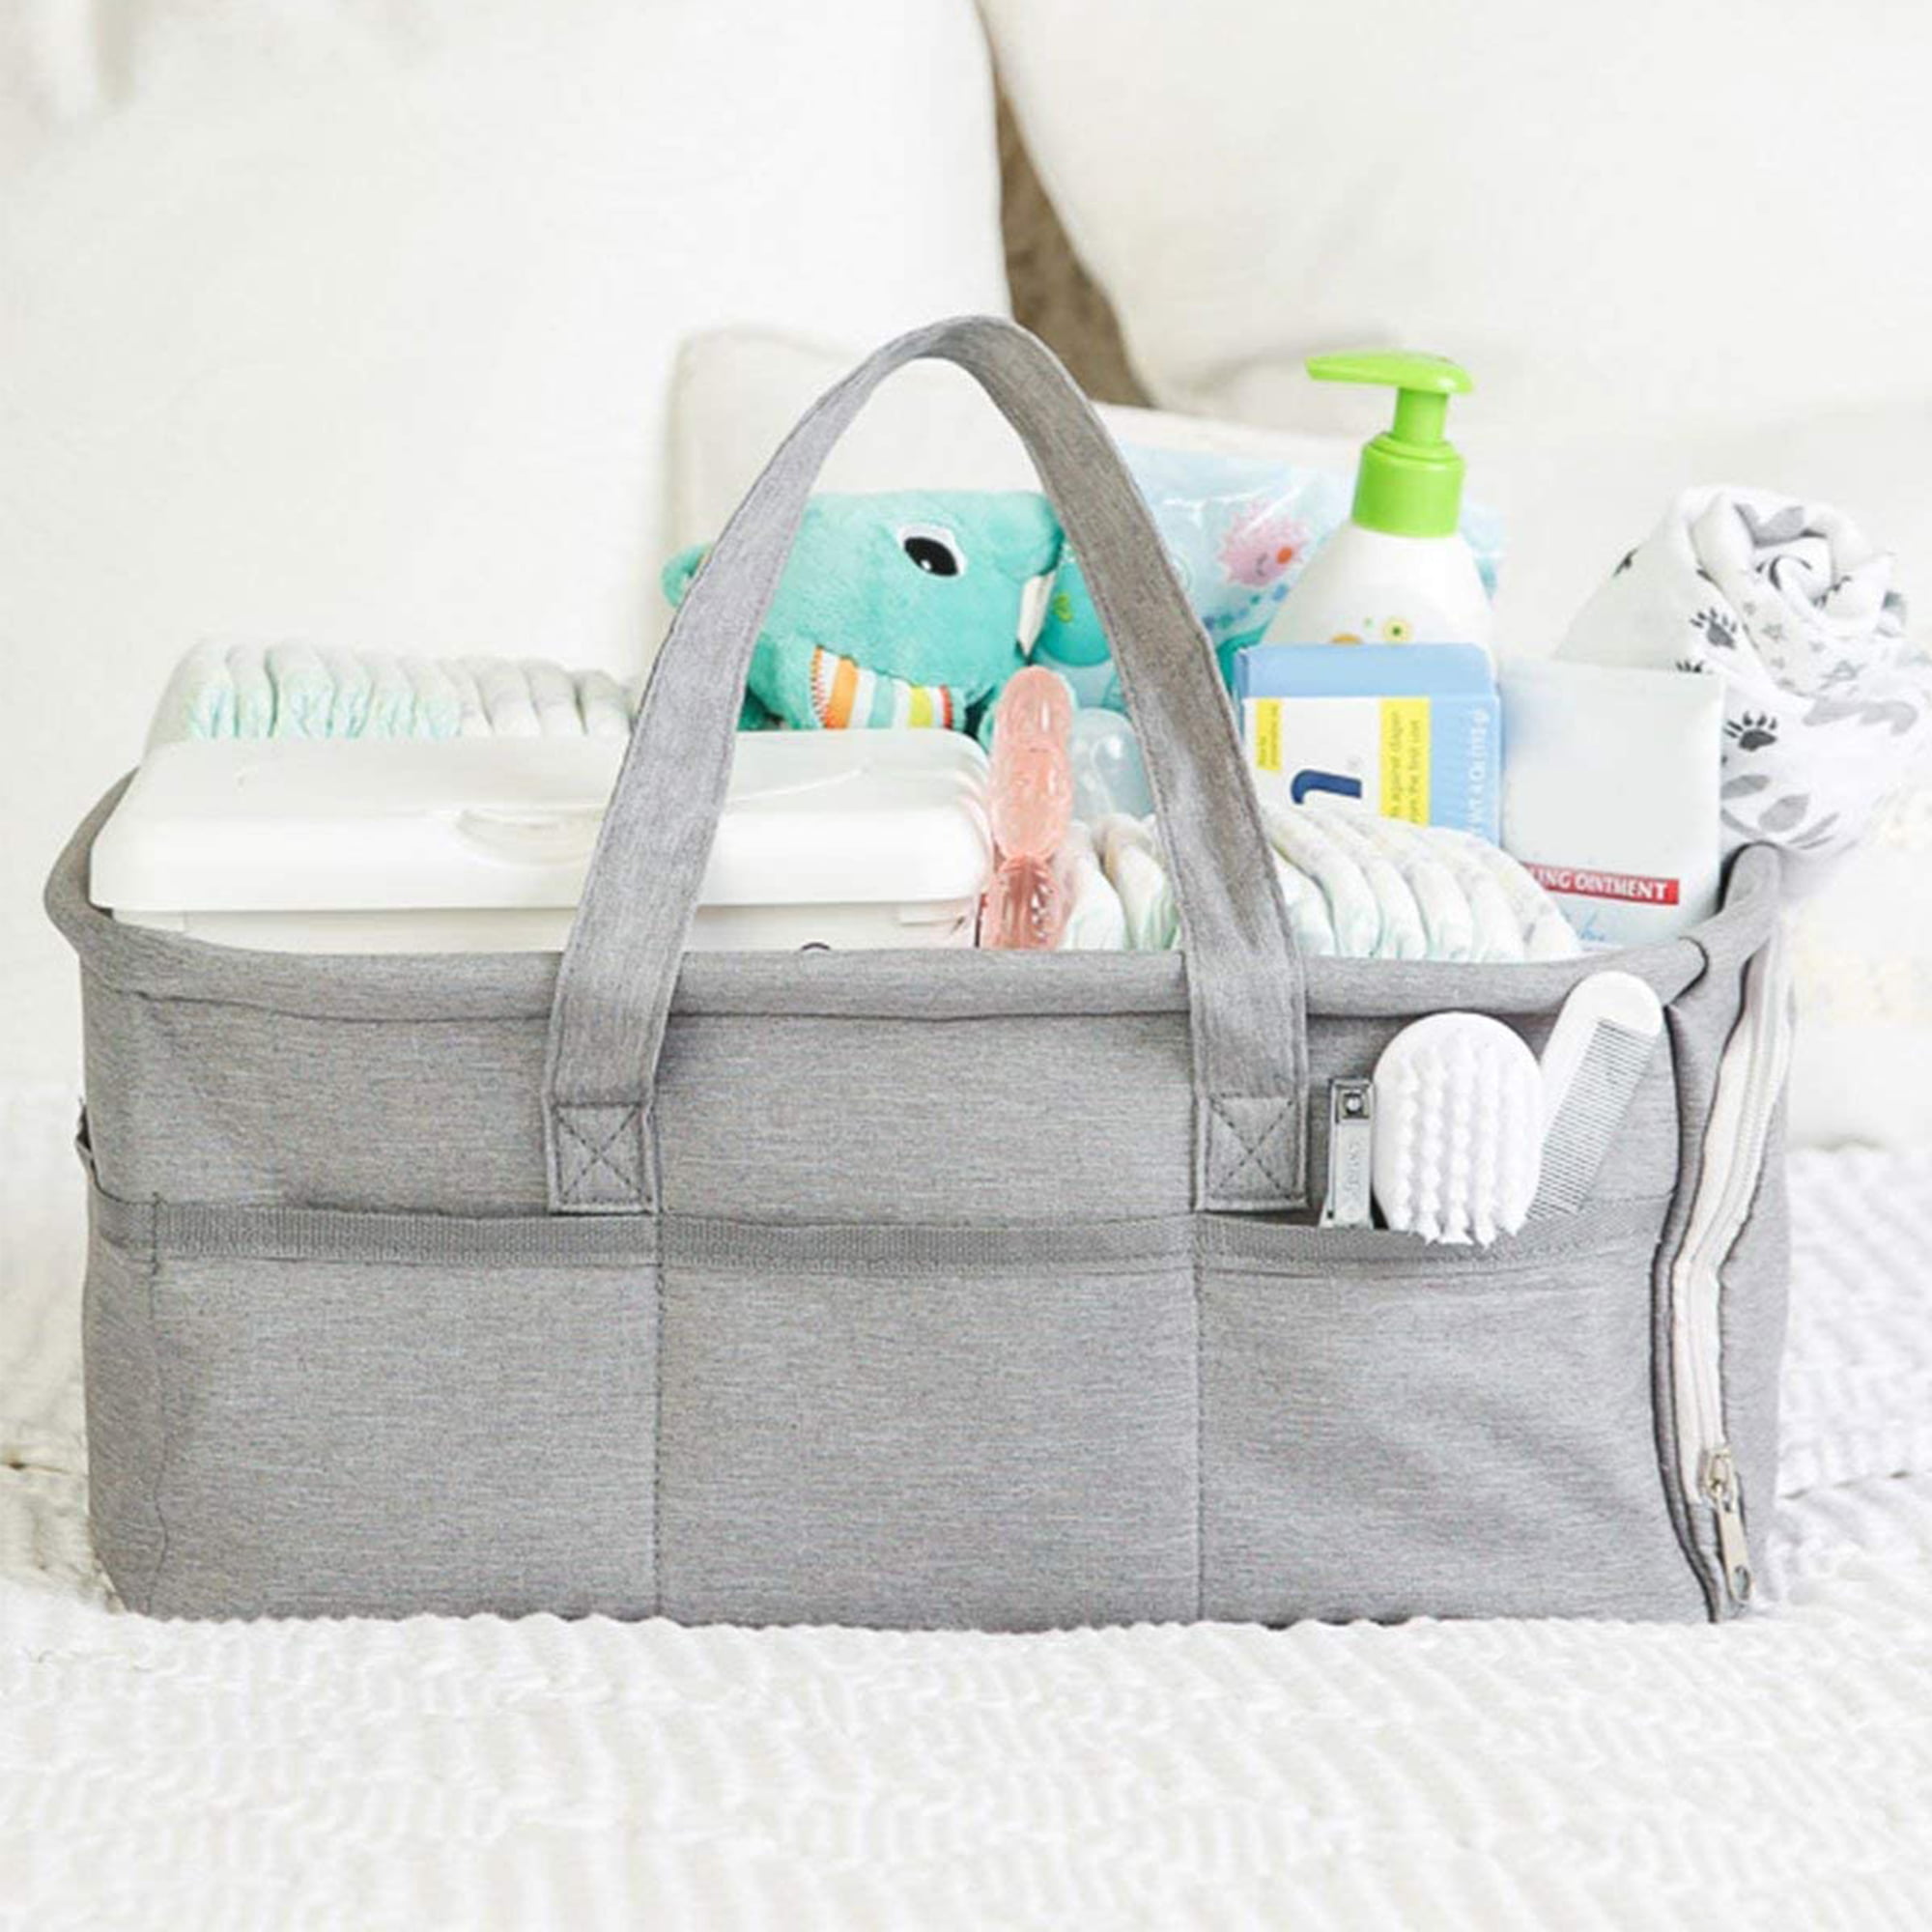 Grey Colour Baby Shower Gifts *Bonus* Foldable Baby Changing Mat and Gift Box LittleCherrubCo Baby Nappy Caddy Organiser Large Compartment Spaces with Dividers Newborn Essentials Baby Caddy